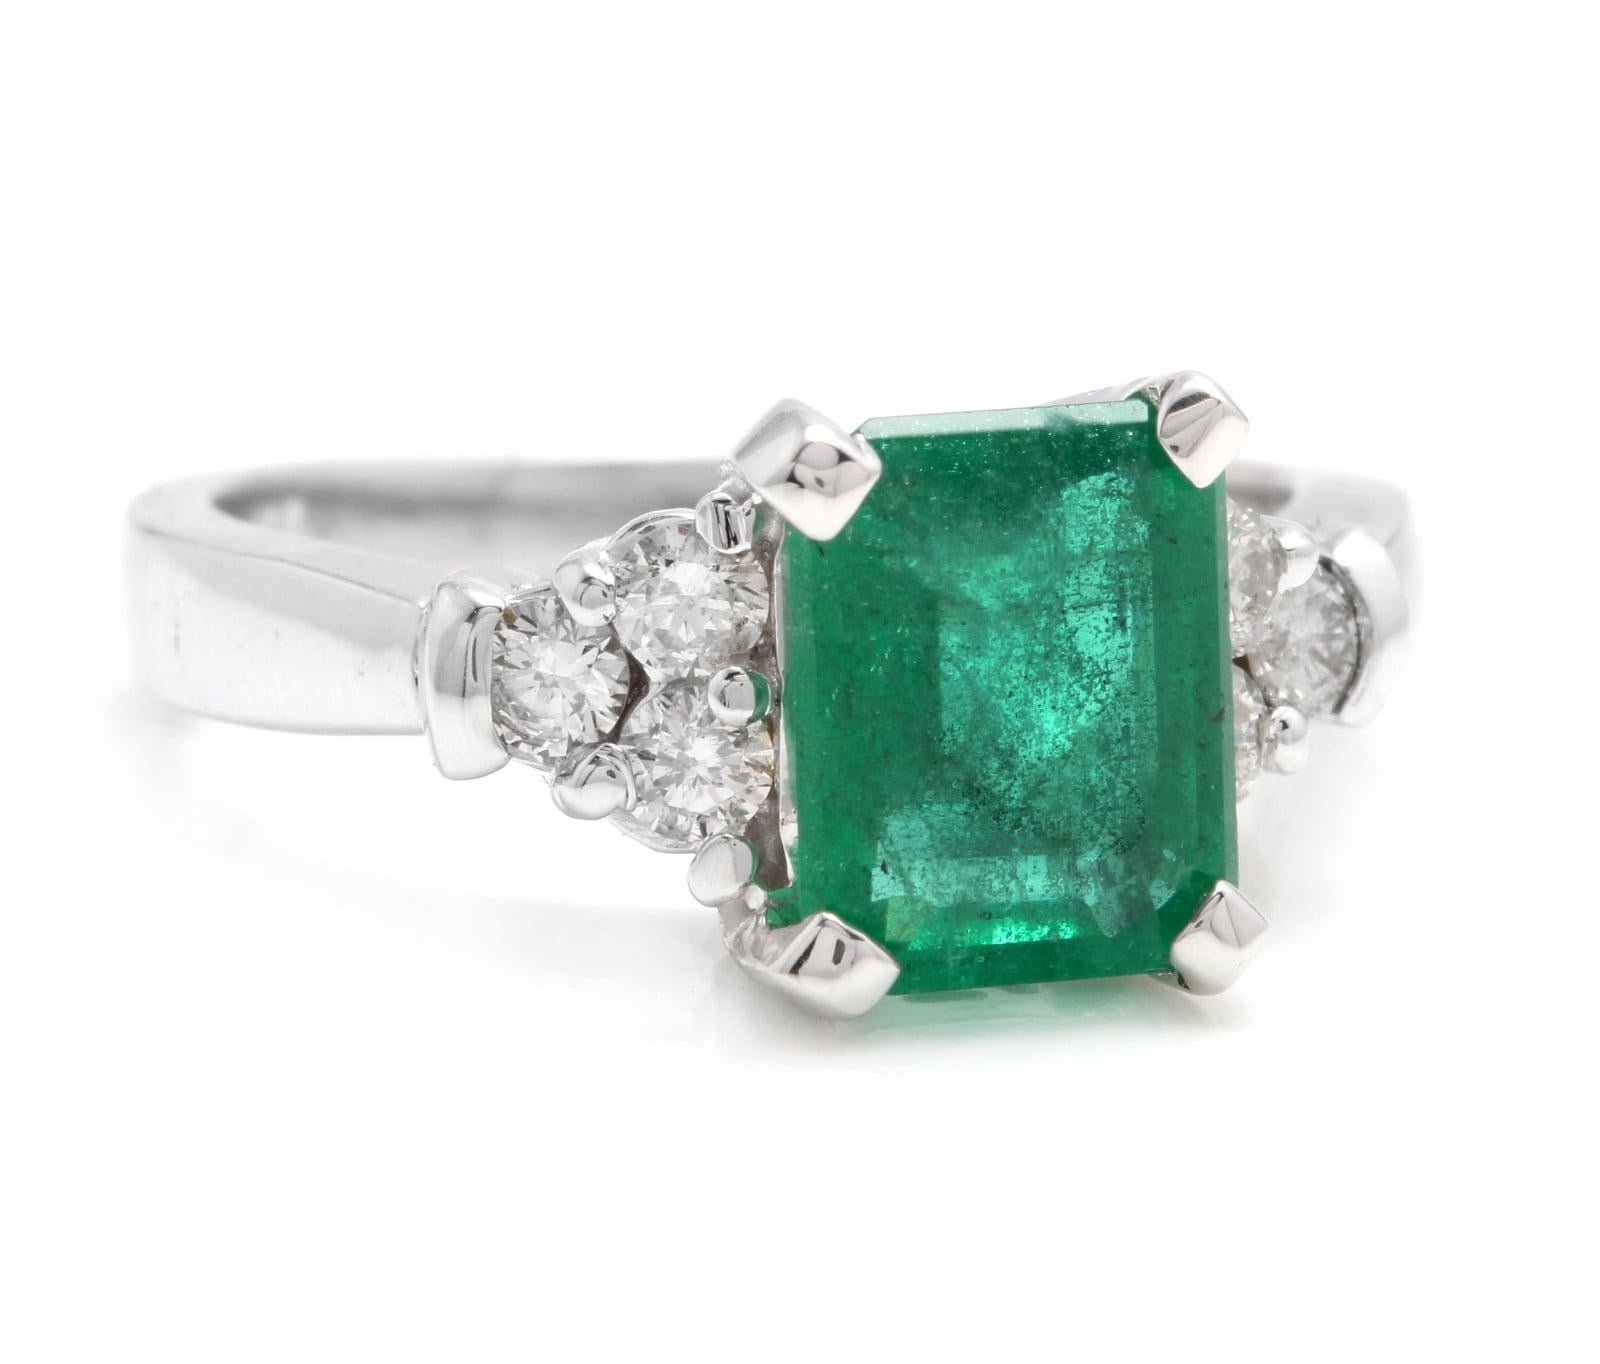 2.90 Carats Natural Emerald and Diamond 14K Solid White Gold Ring

Total Natural Green Emerald Weight is: Approx. 2.60 Carats (transparent)

Emerald Measures: Approx. 9 x 7mm

Emerald Treatment: Oiling

Natural Round Diamonds Weight: Approx. 0.30